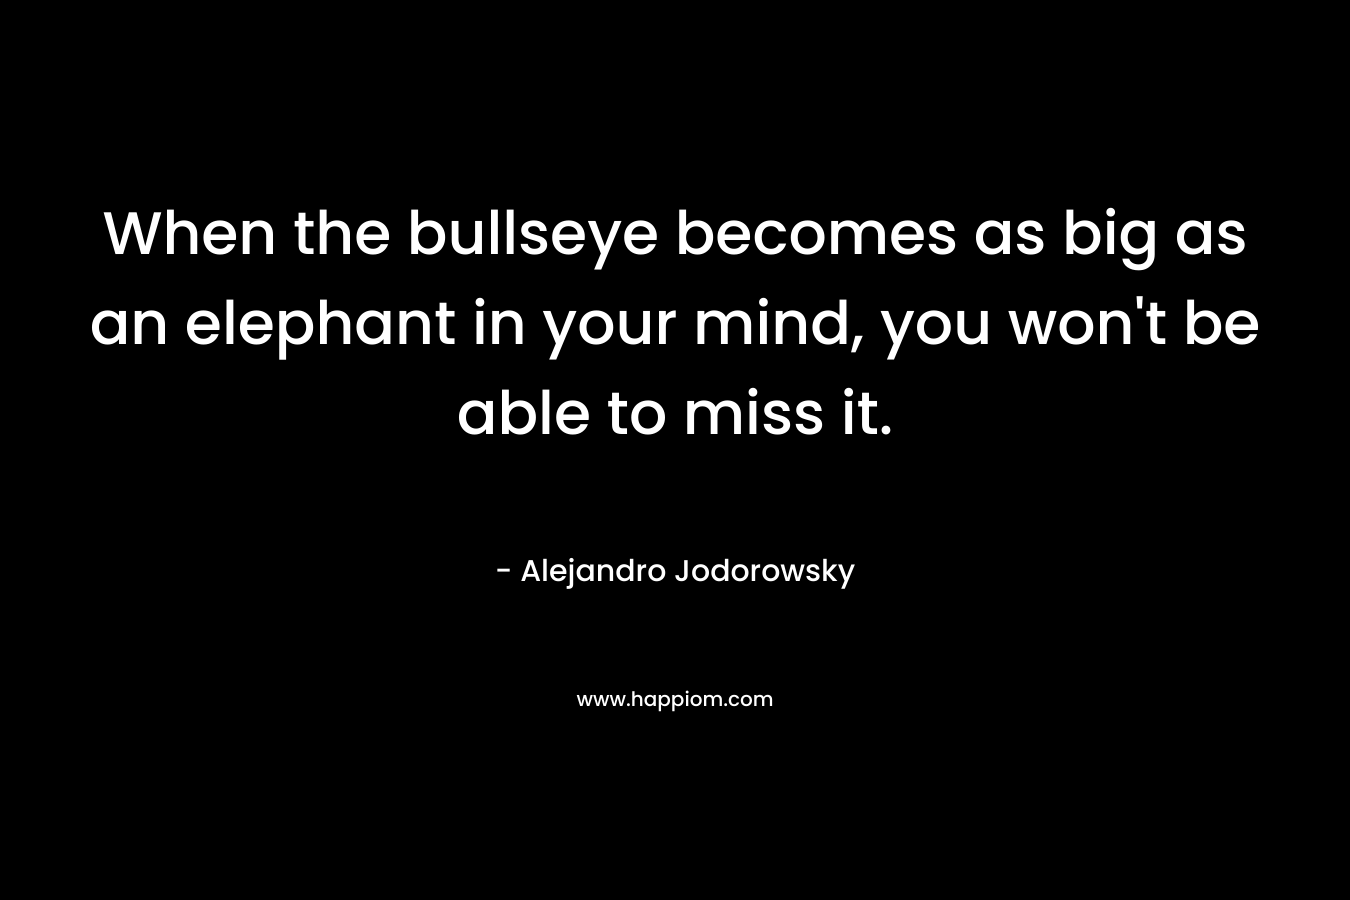 When the bullseye becomes as big as an elephant in your mind, you won't be able to miss it.